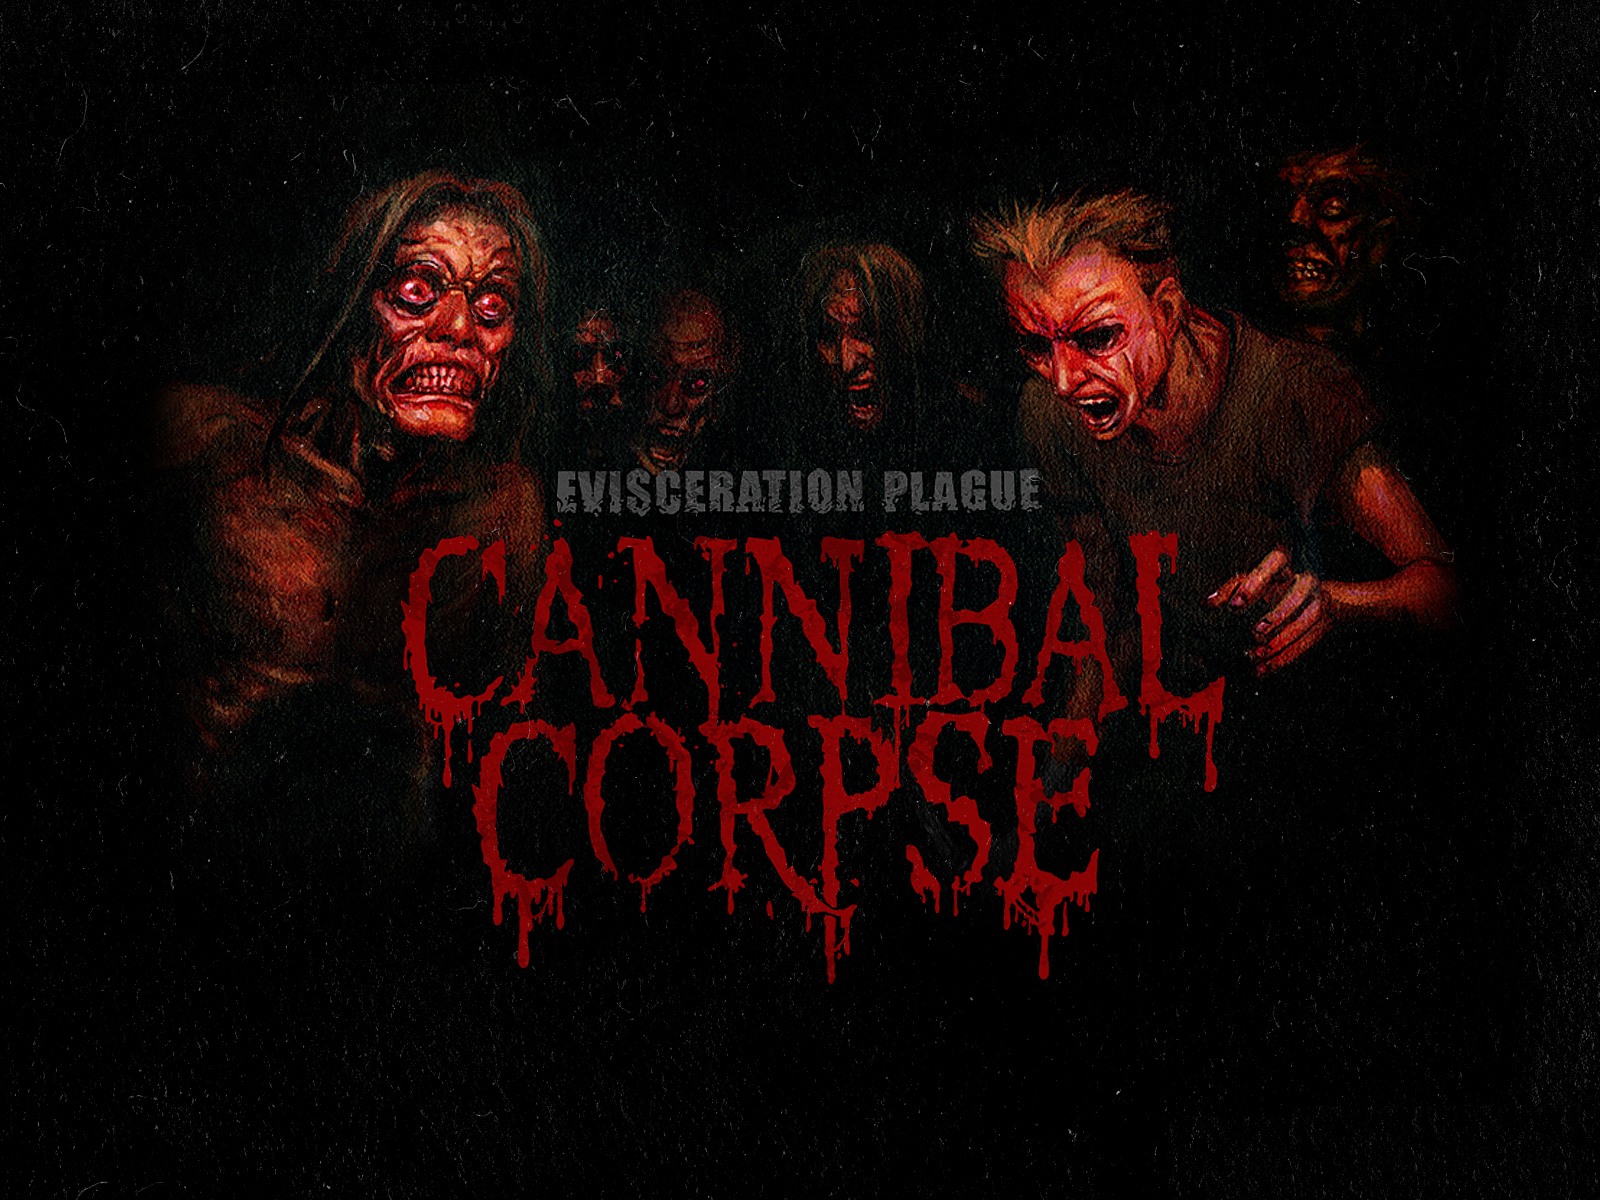 android horror, cannibal corpse, music, dark, death metal